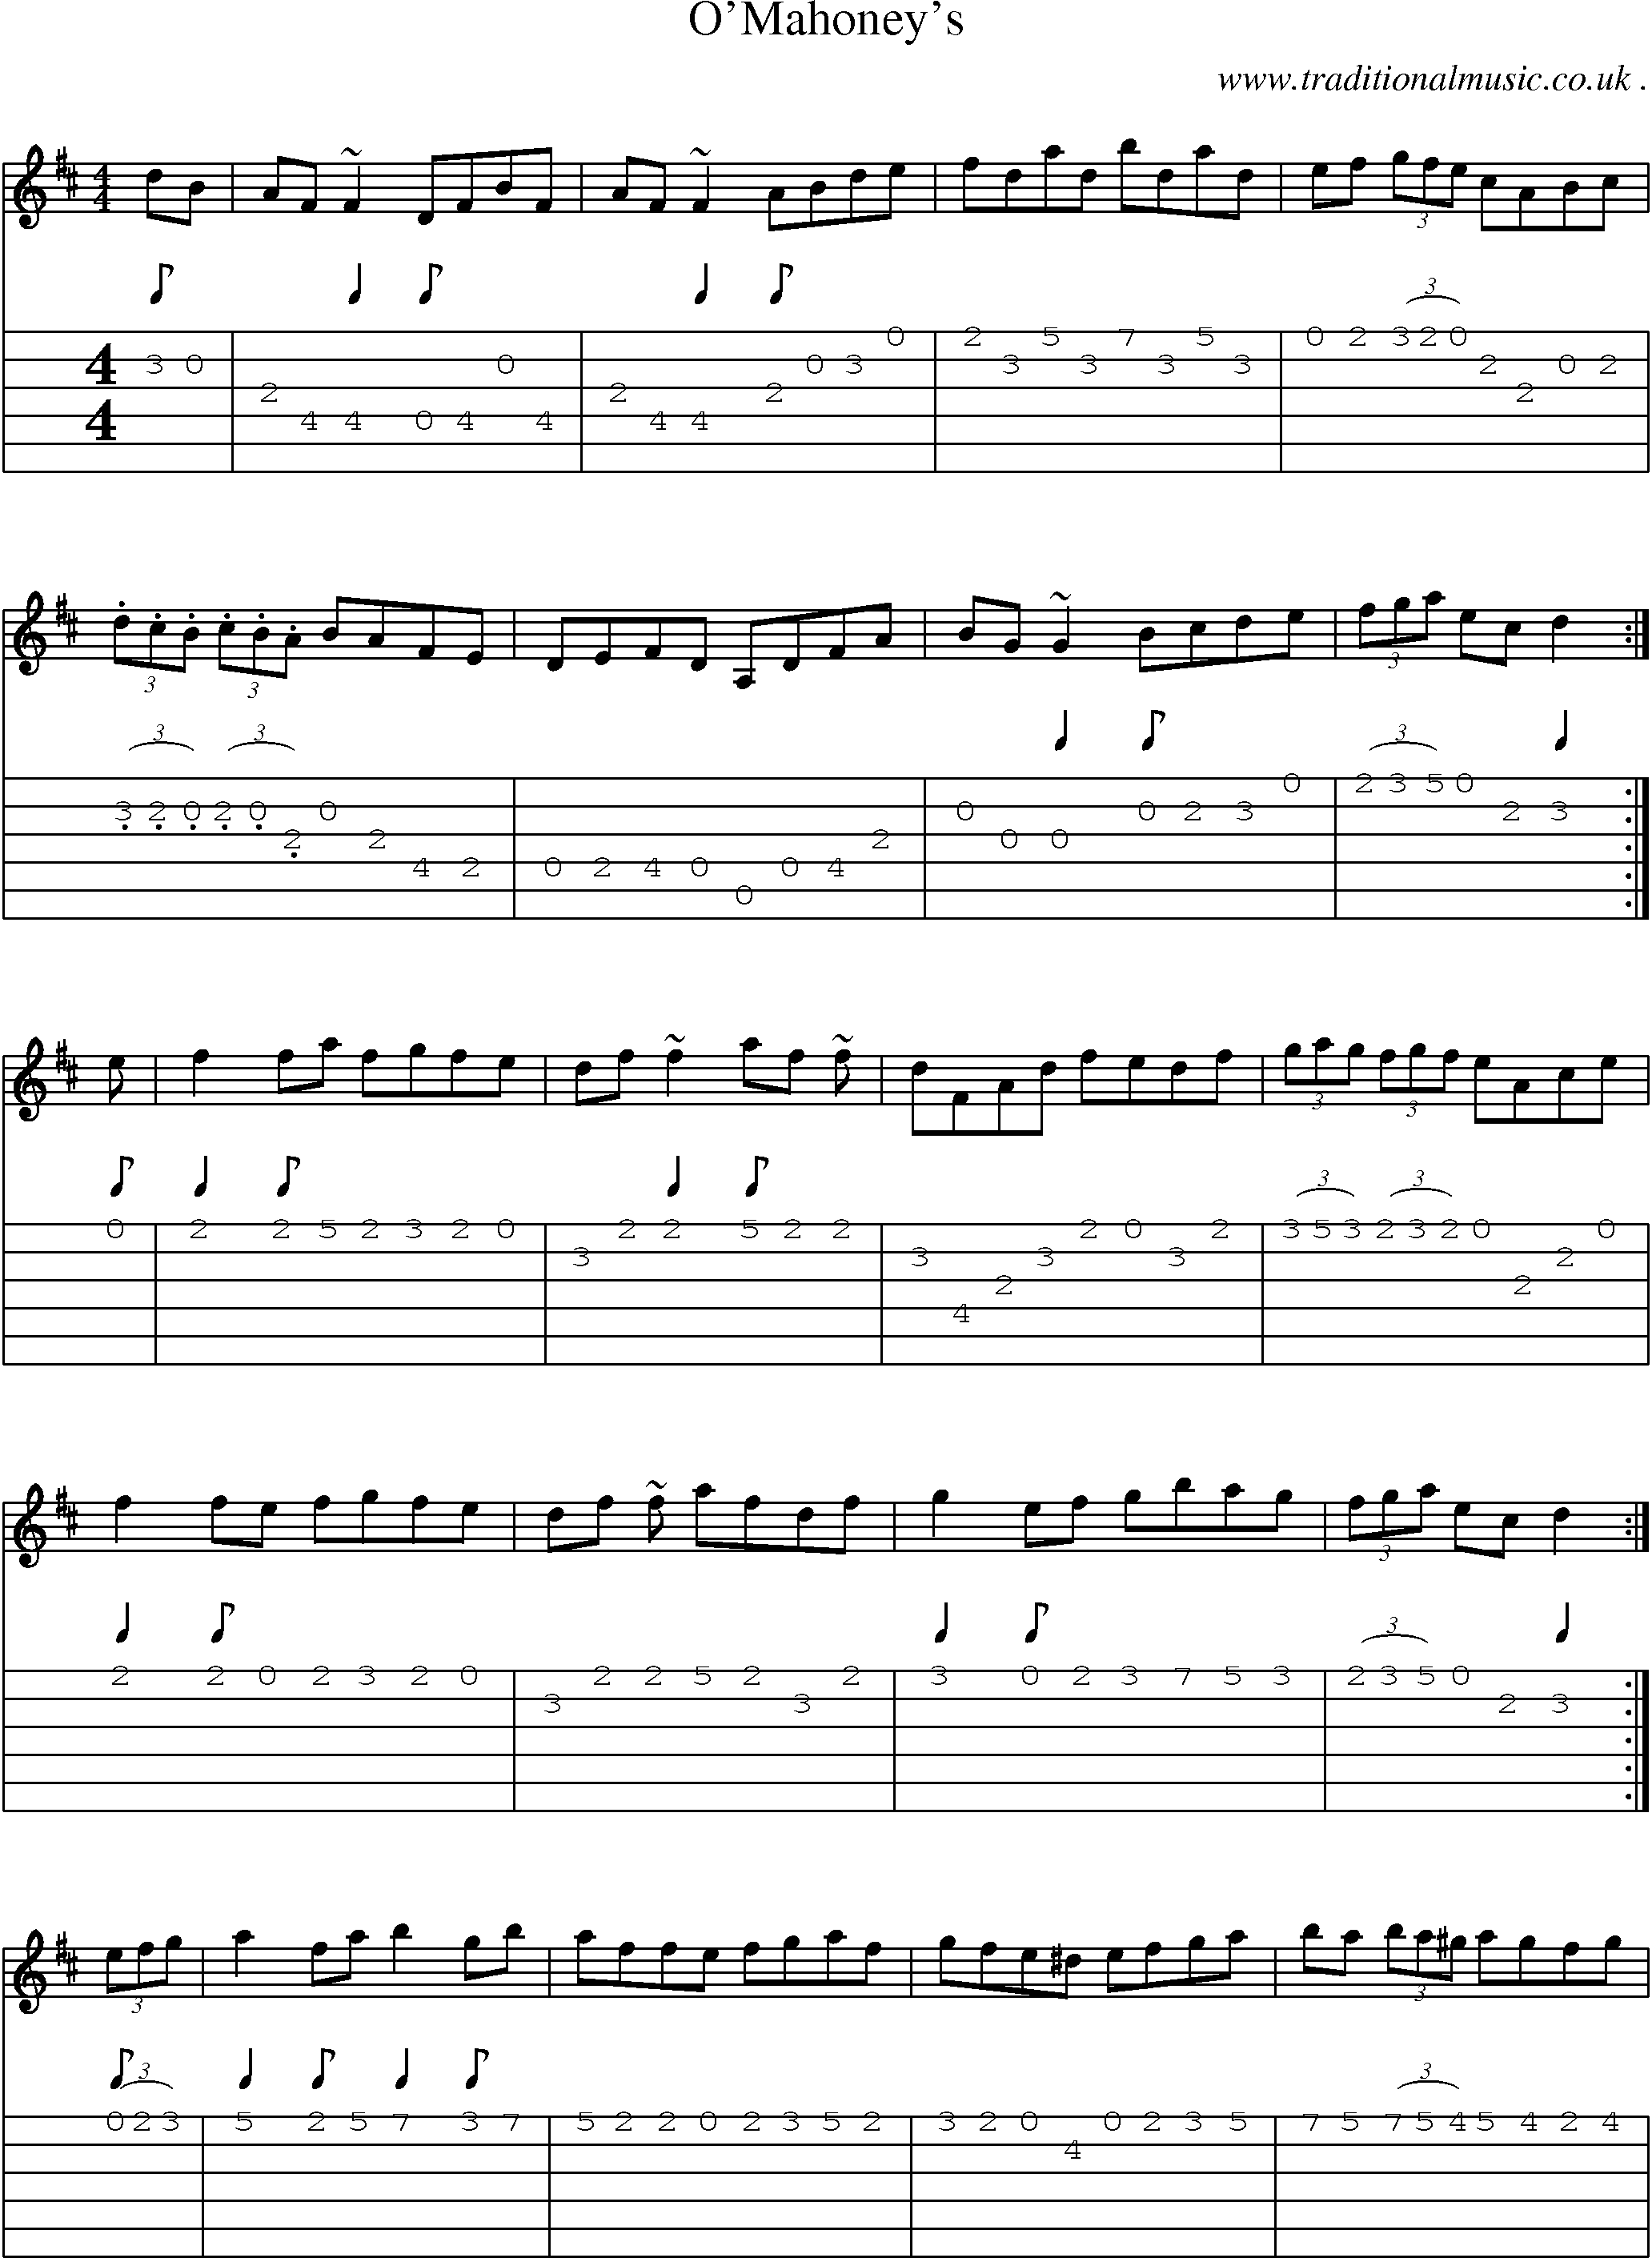 Music Score and Guitar Tabs for Omahoneys